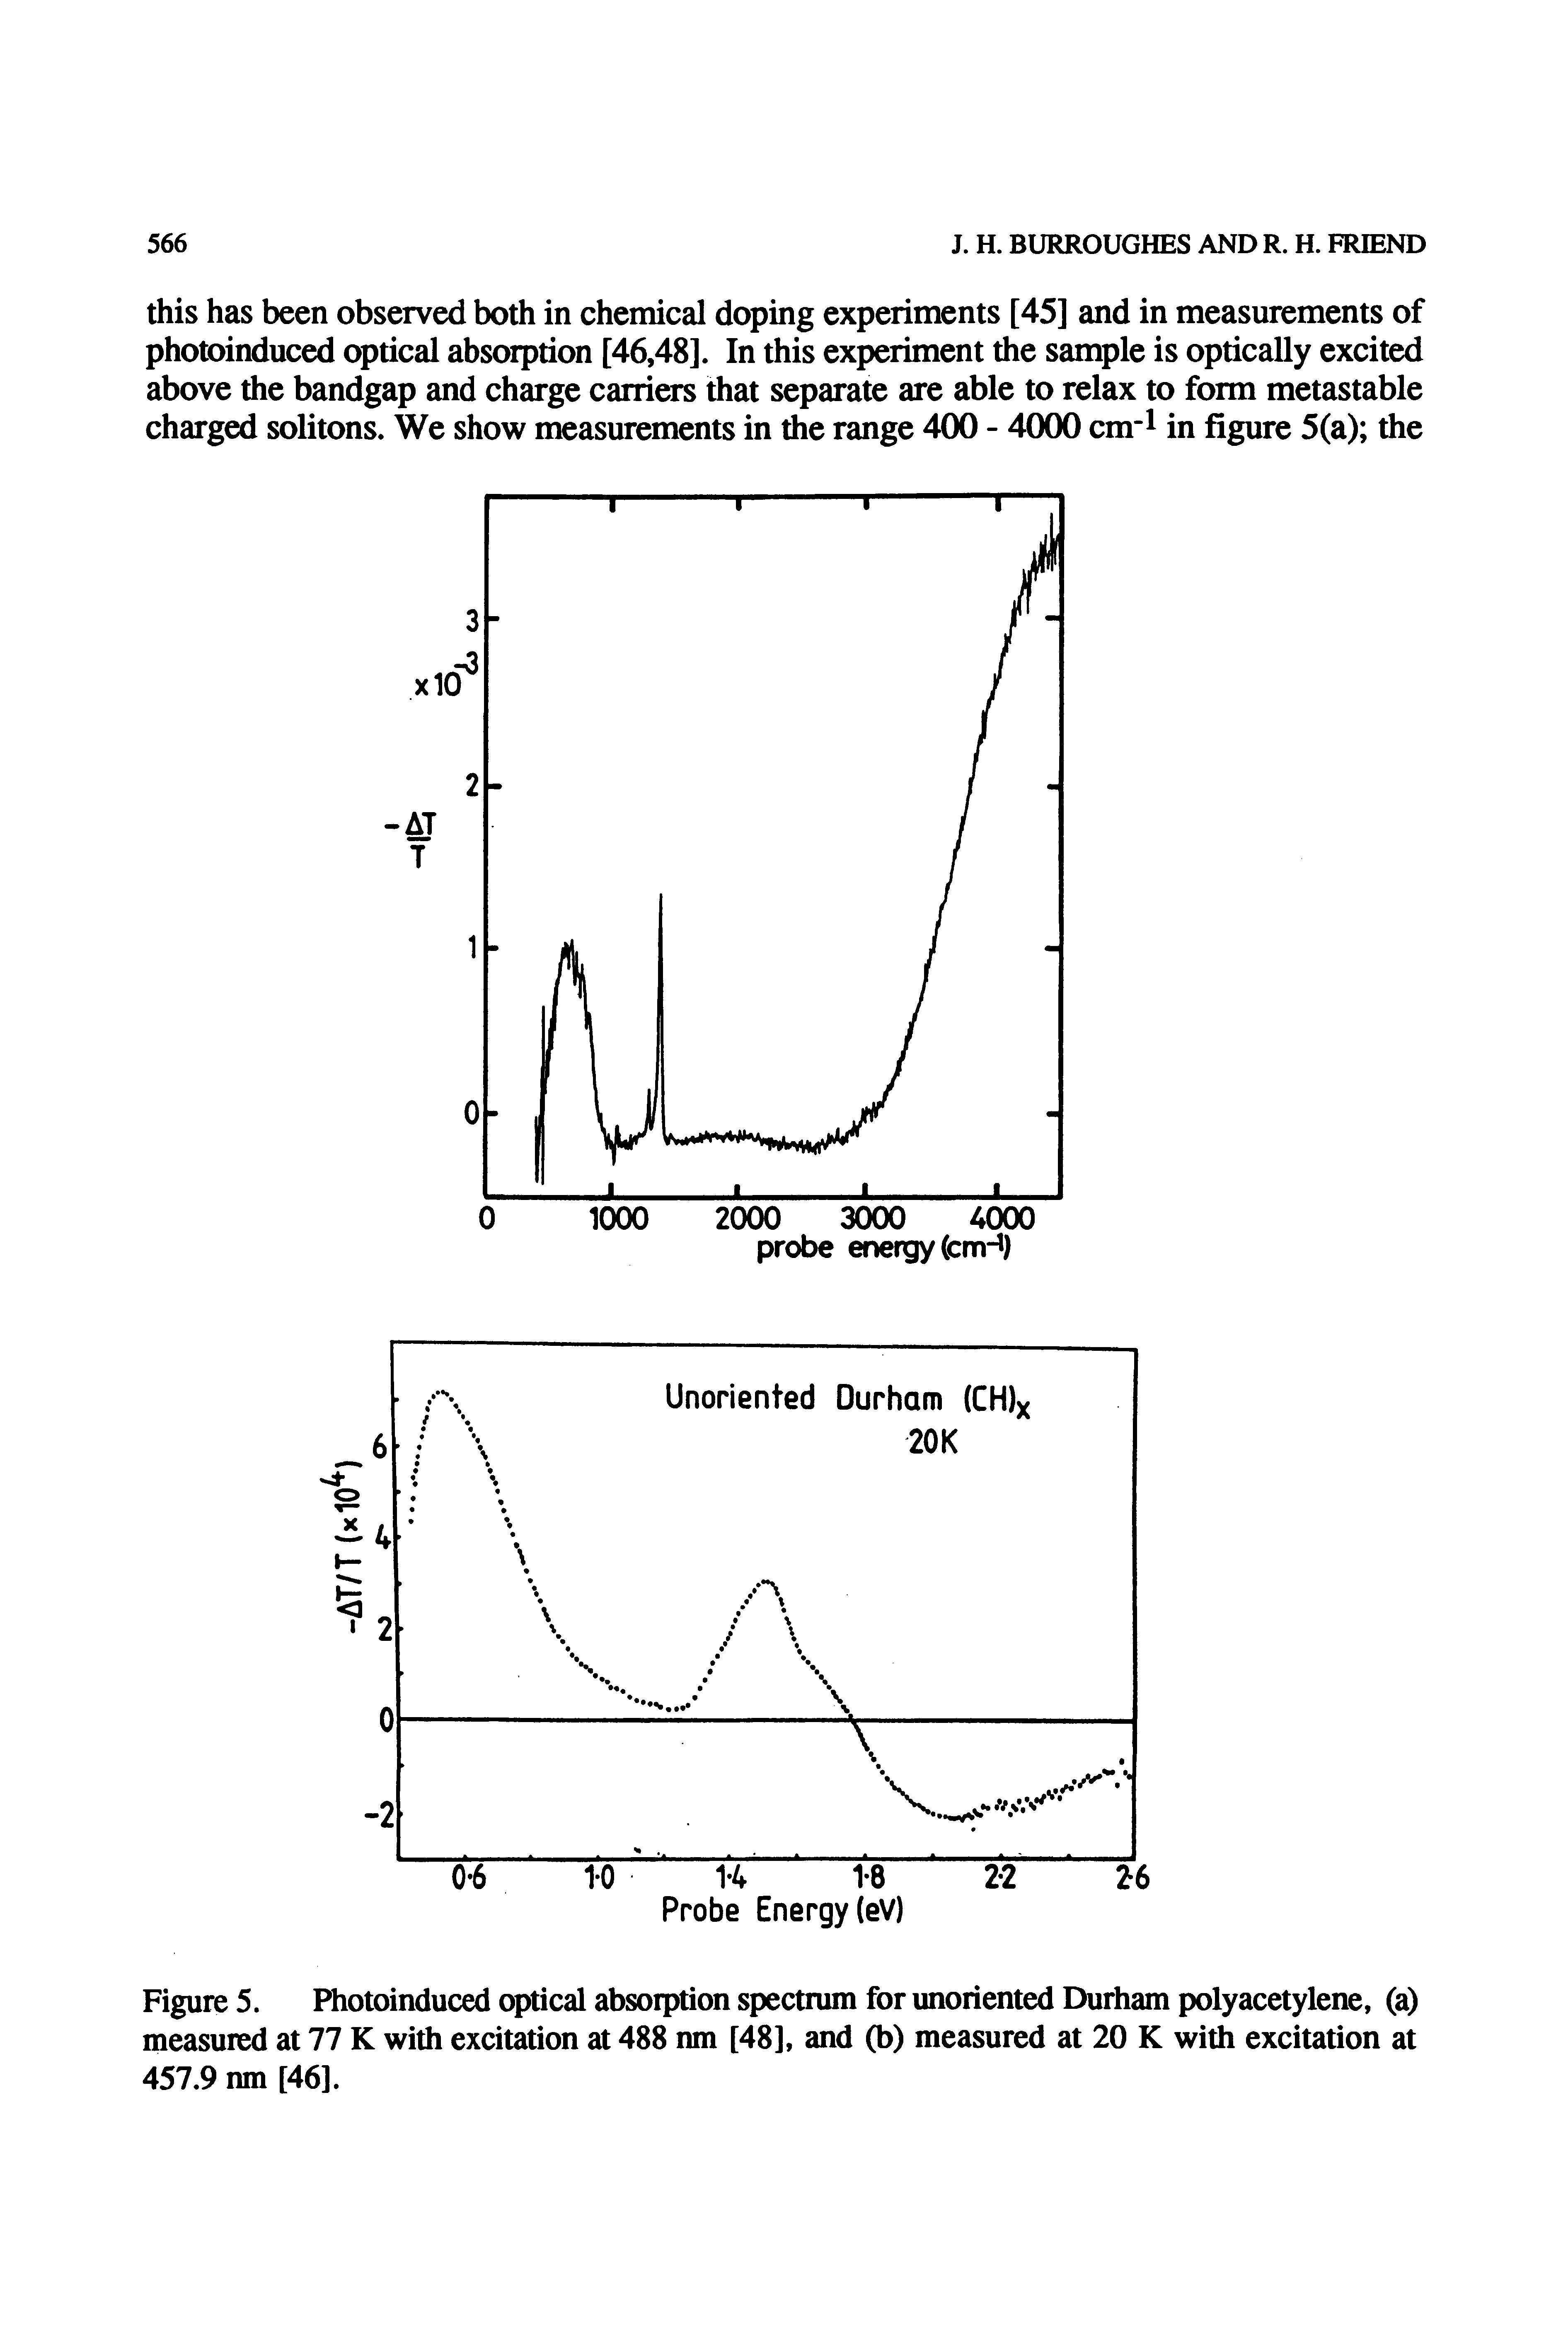 Figure 5. Photoinduced q>tical absoiption spectrum for unoriented Durtiam polyacetylene, (a) measured at 77 K with excitation at 488 nm [48], and (b) measured at 20 K with excitation at 457.9 nm [46].